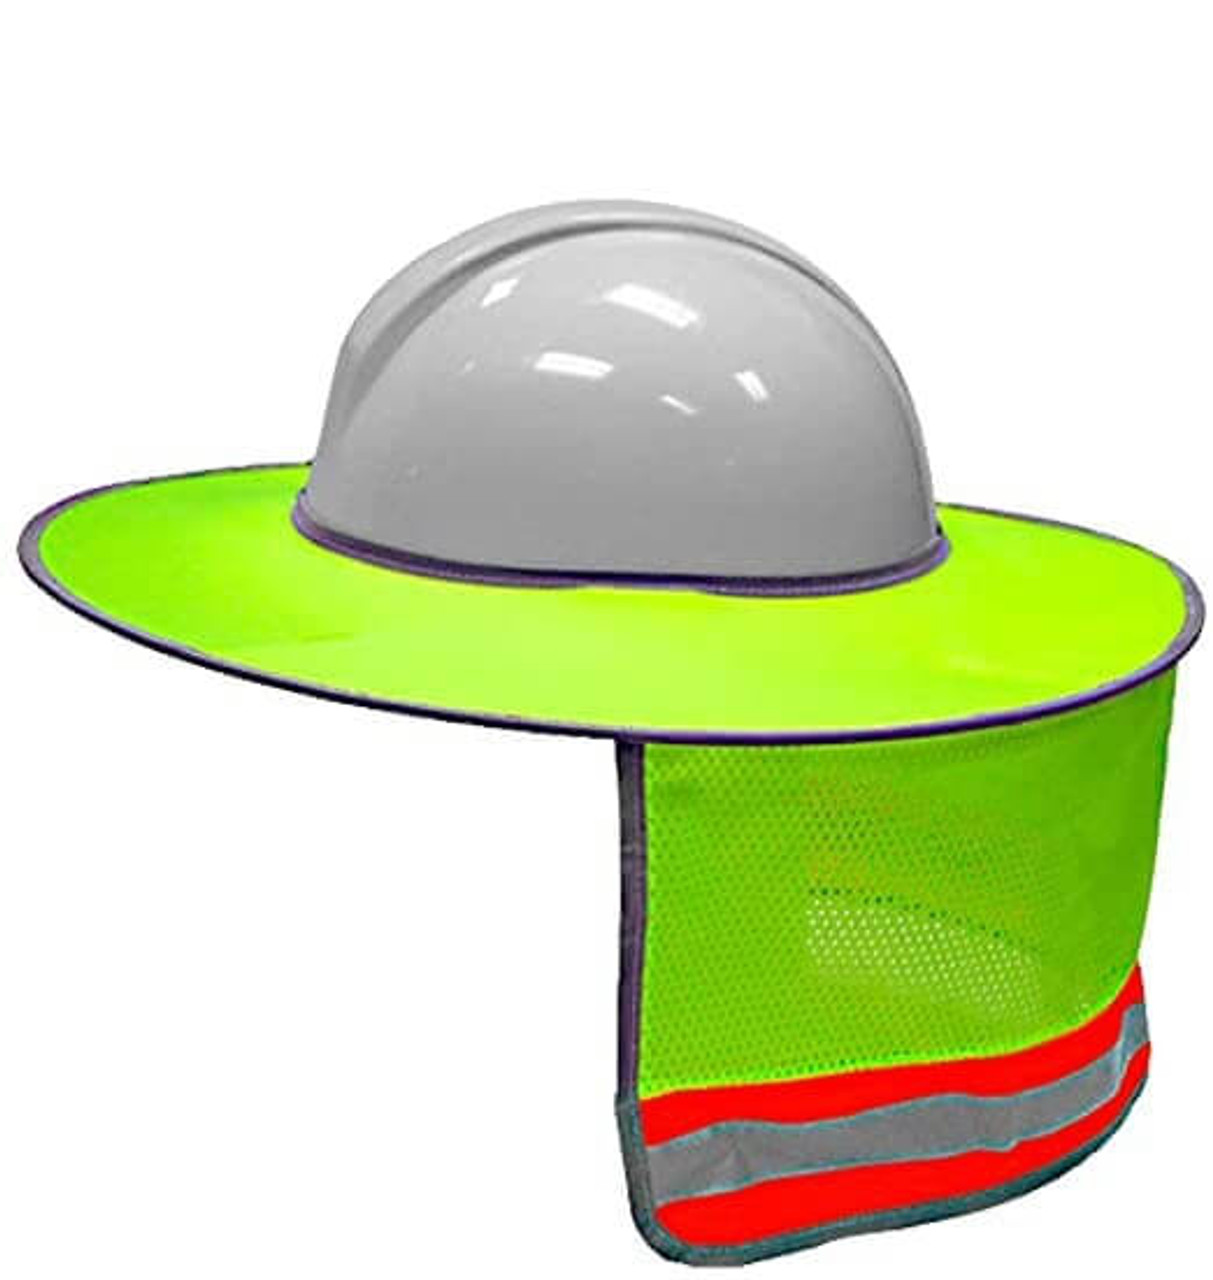 Cordova VHB101 Hard Hat Neck Shade: POLYESTER, Lime, Use with Cap Style & Full-Brim Hard Hat